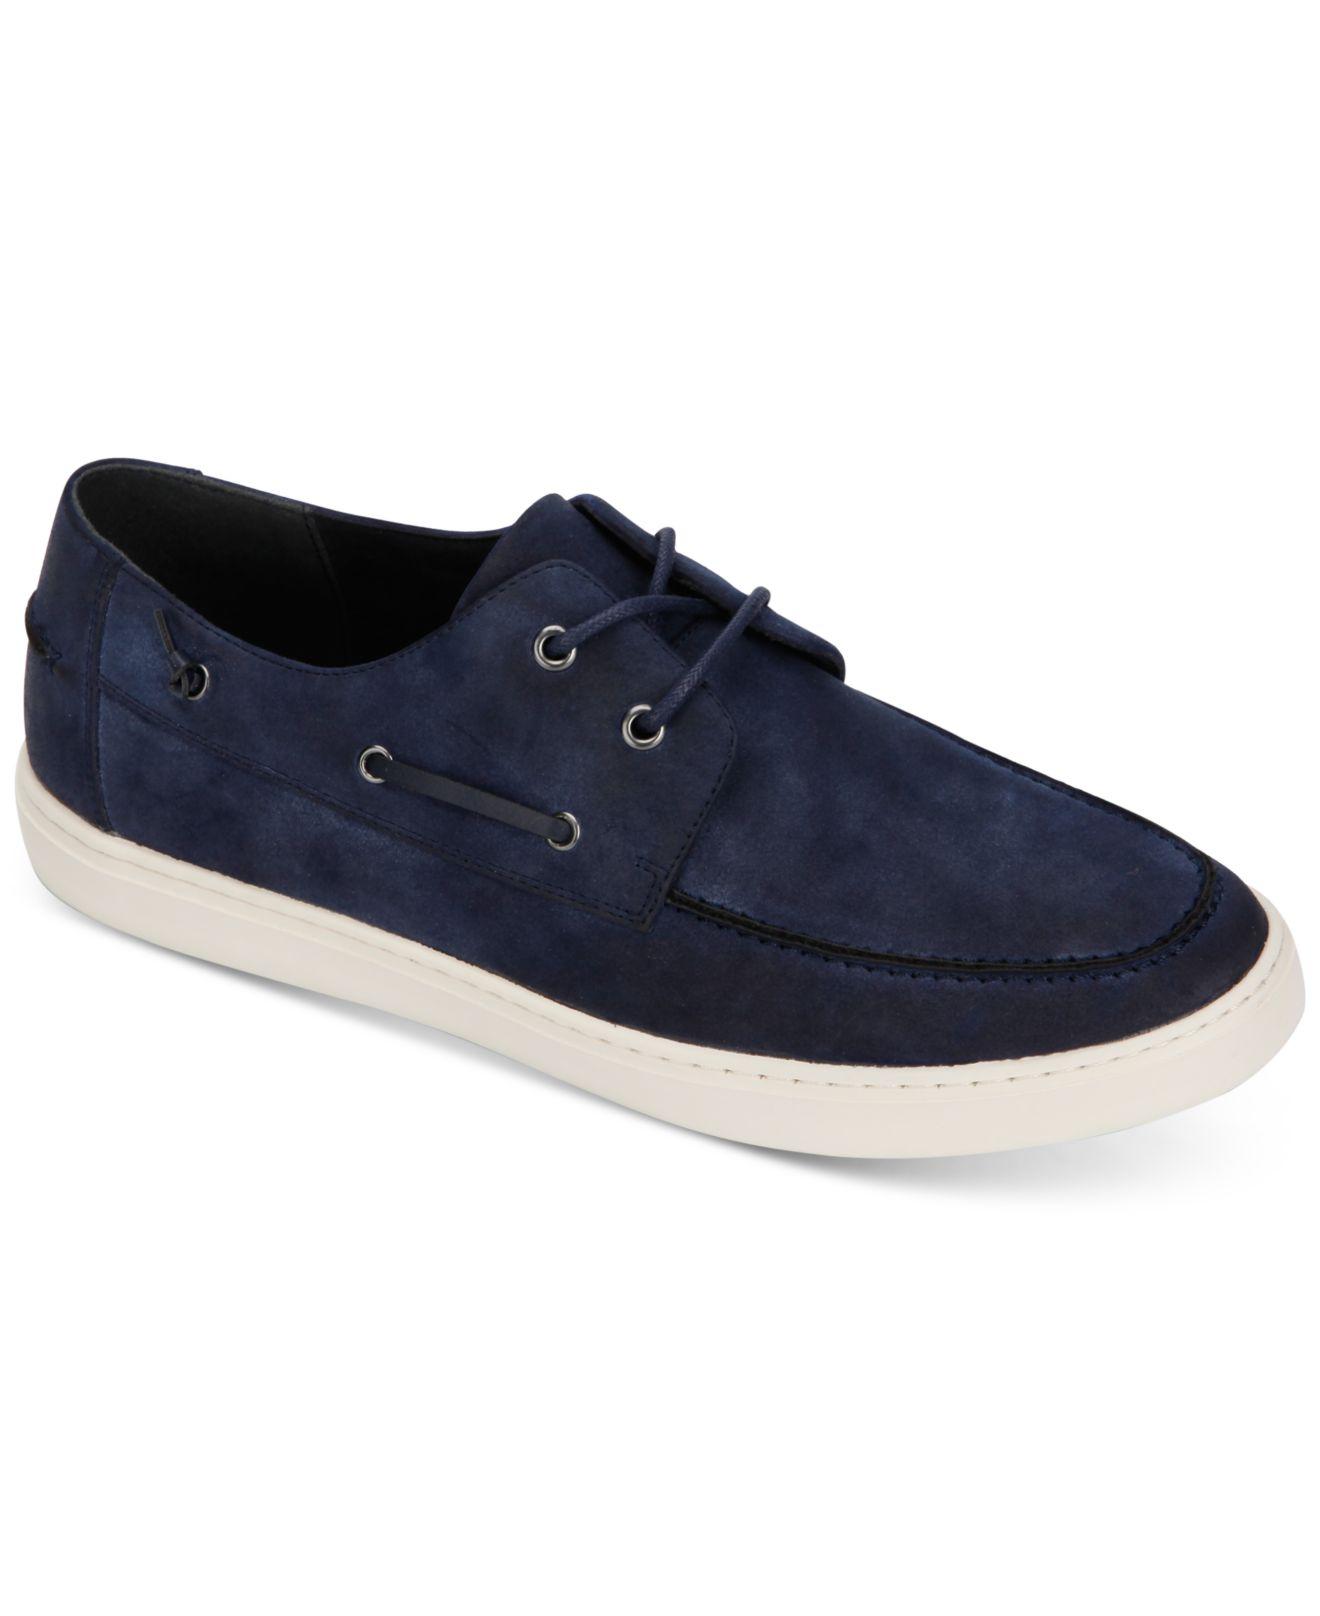 Kenneth Cole Reaction Indy Boat Shoes in Navy (Blue) for Men - Save 65% ...